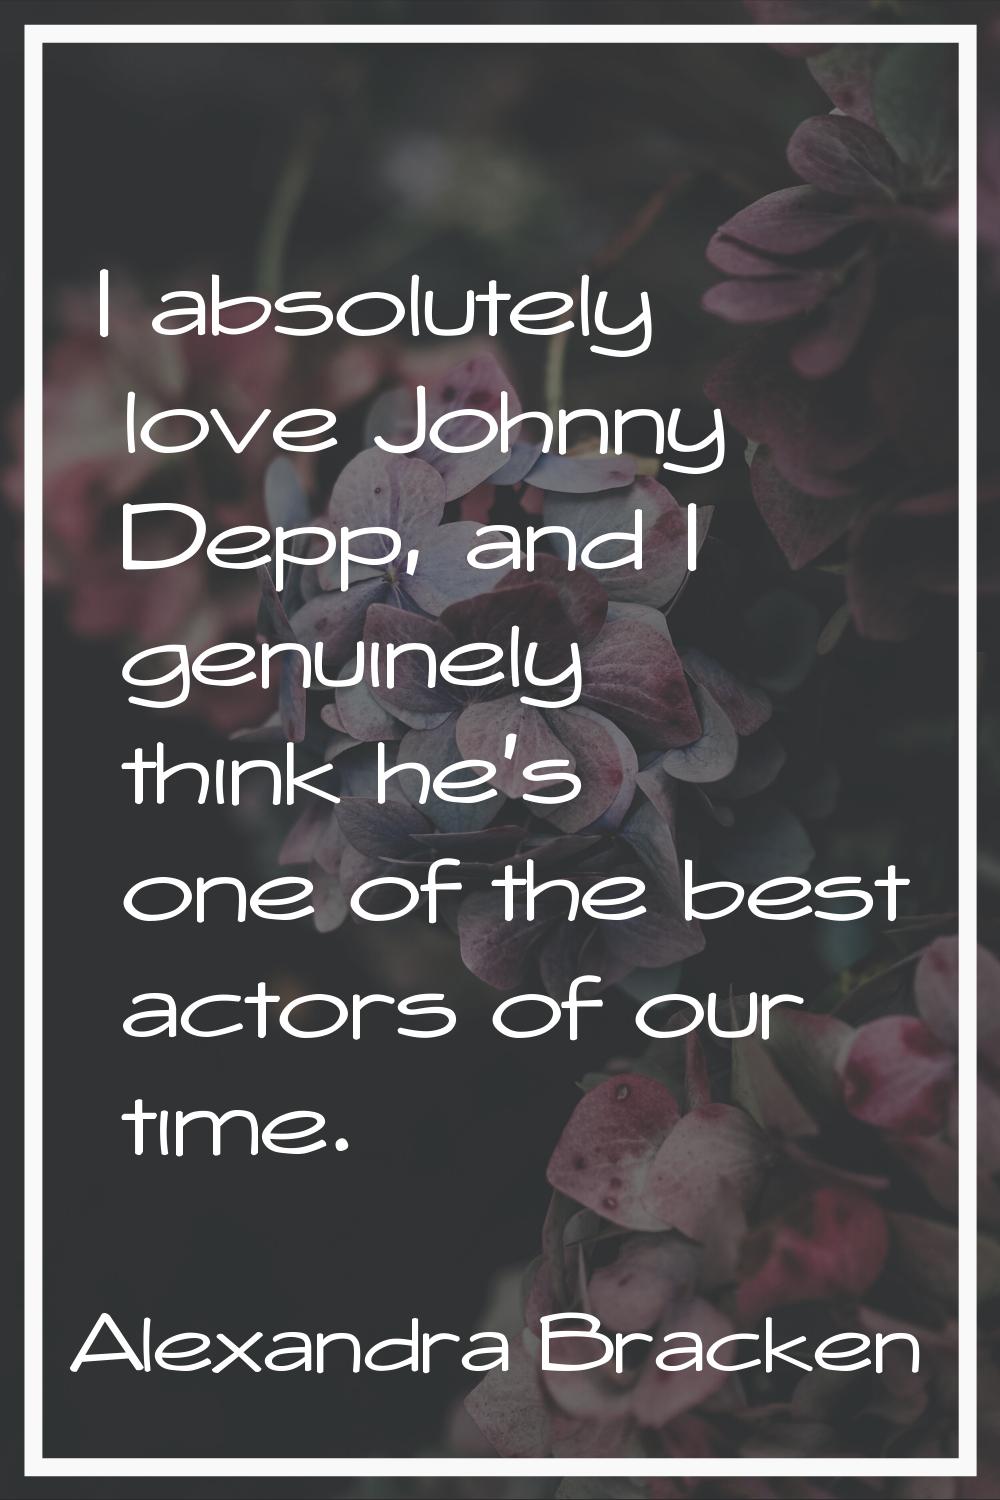 I absolutely love Johnny Depp, and I genuinely think he's one of the best actors of our time.